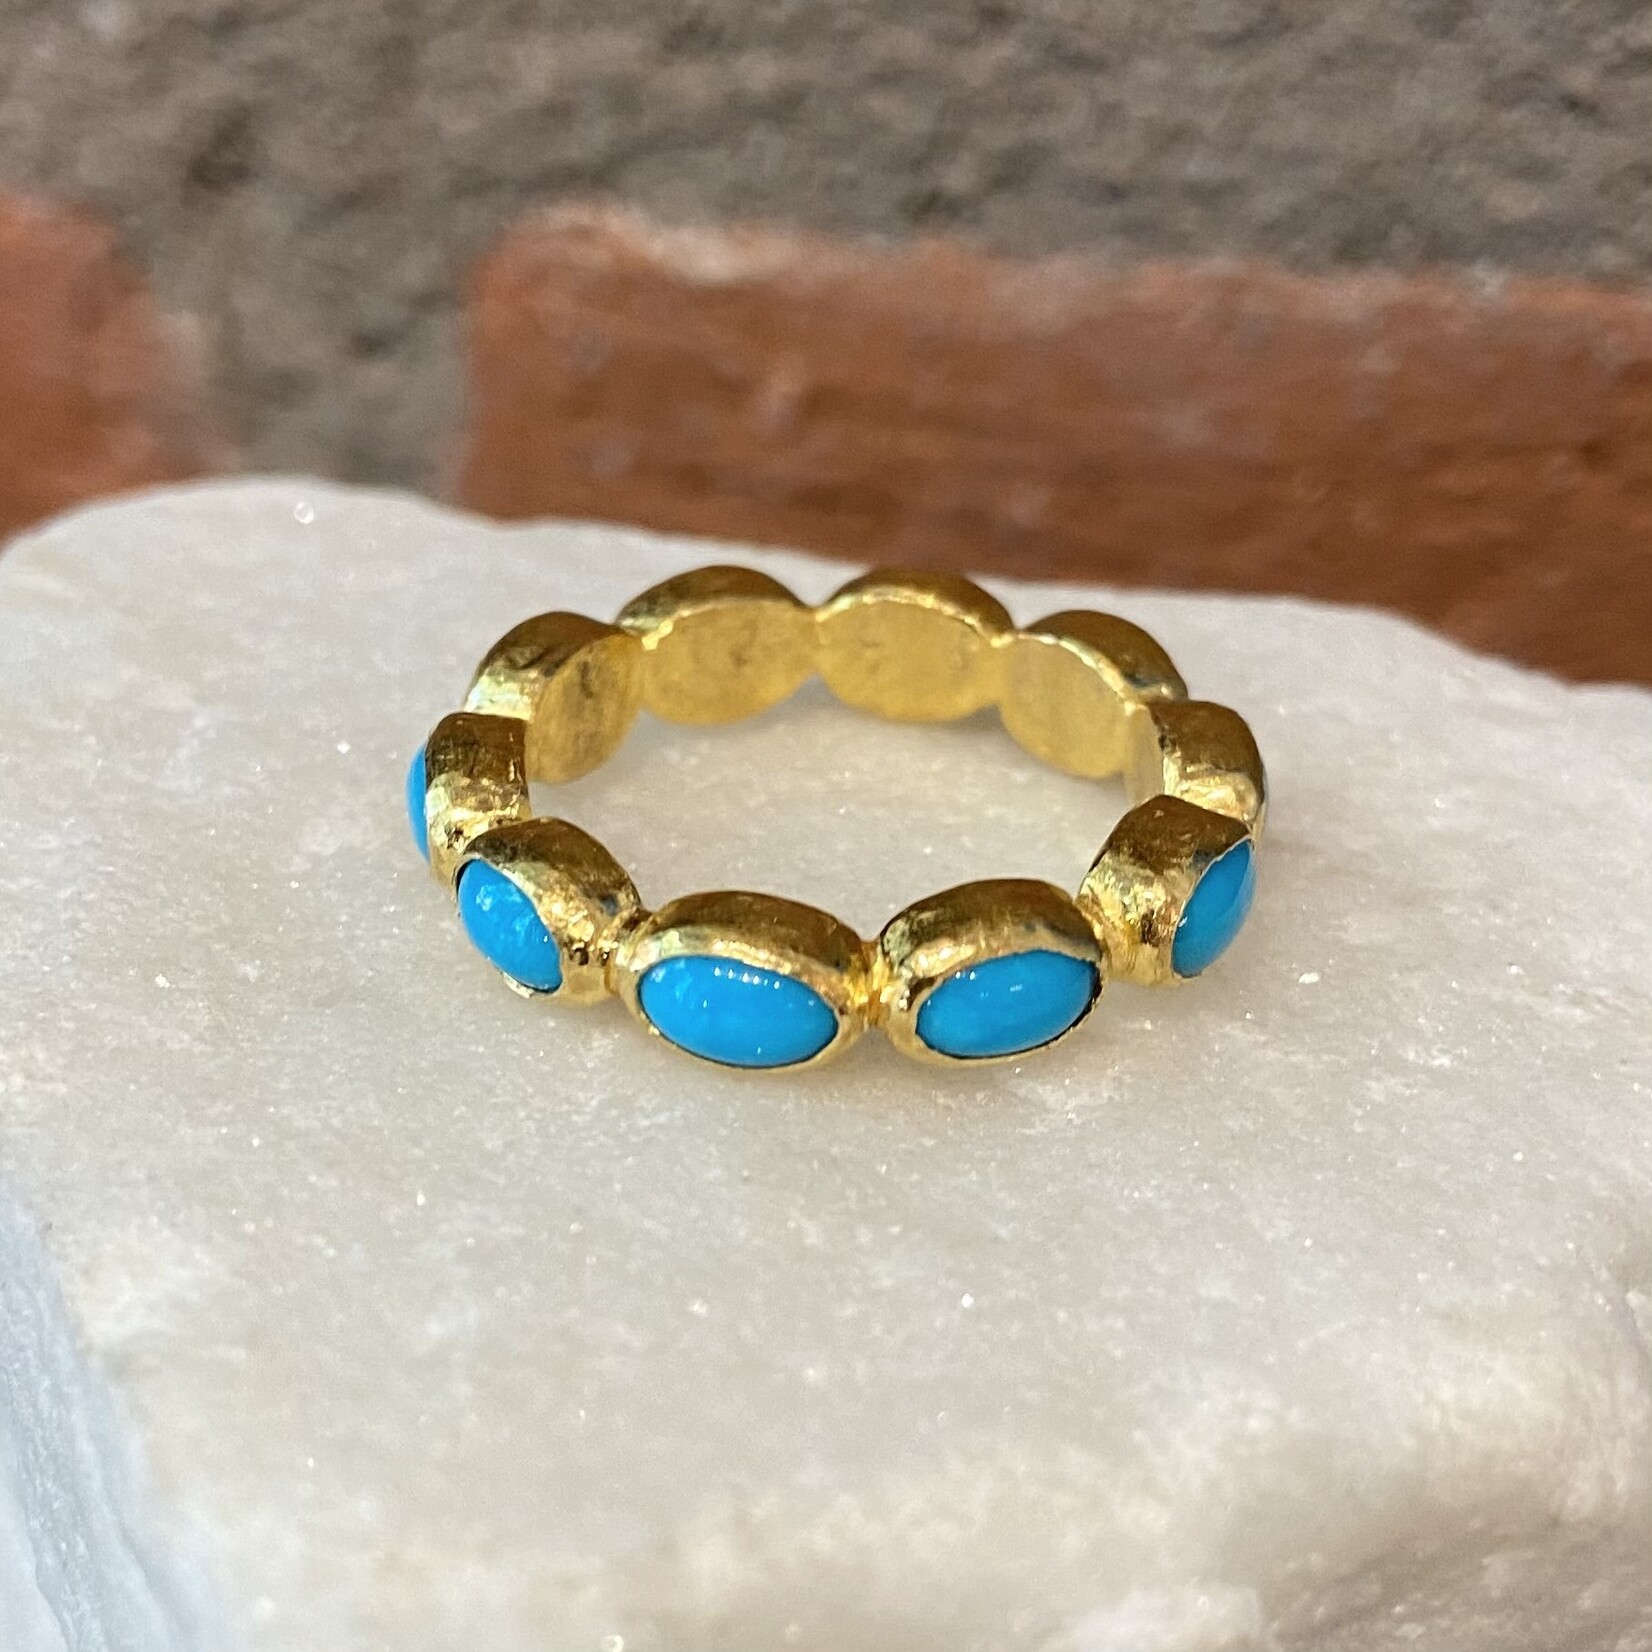 ARA Collection 24k Gold & Turquoise Eternity Band Ring (size 8)